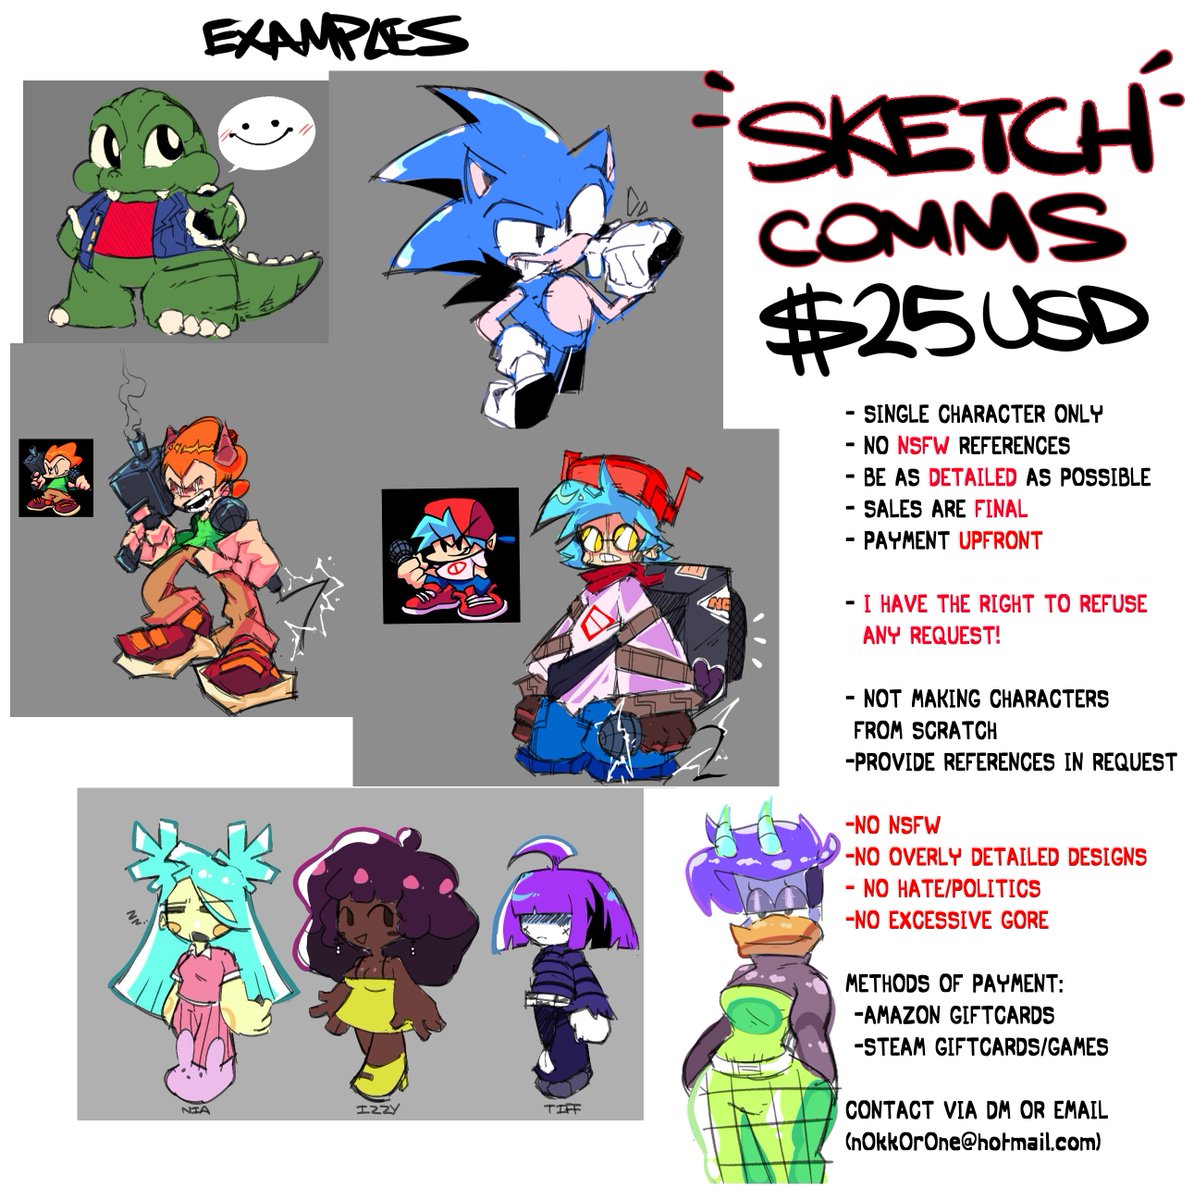 COMMISSION SHEET MASTERPOST
(examples on my newgrounds gallery - https://t.co/jGVB8akhe8) 